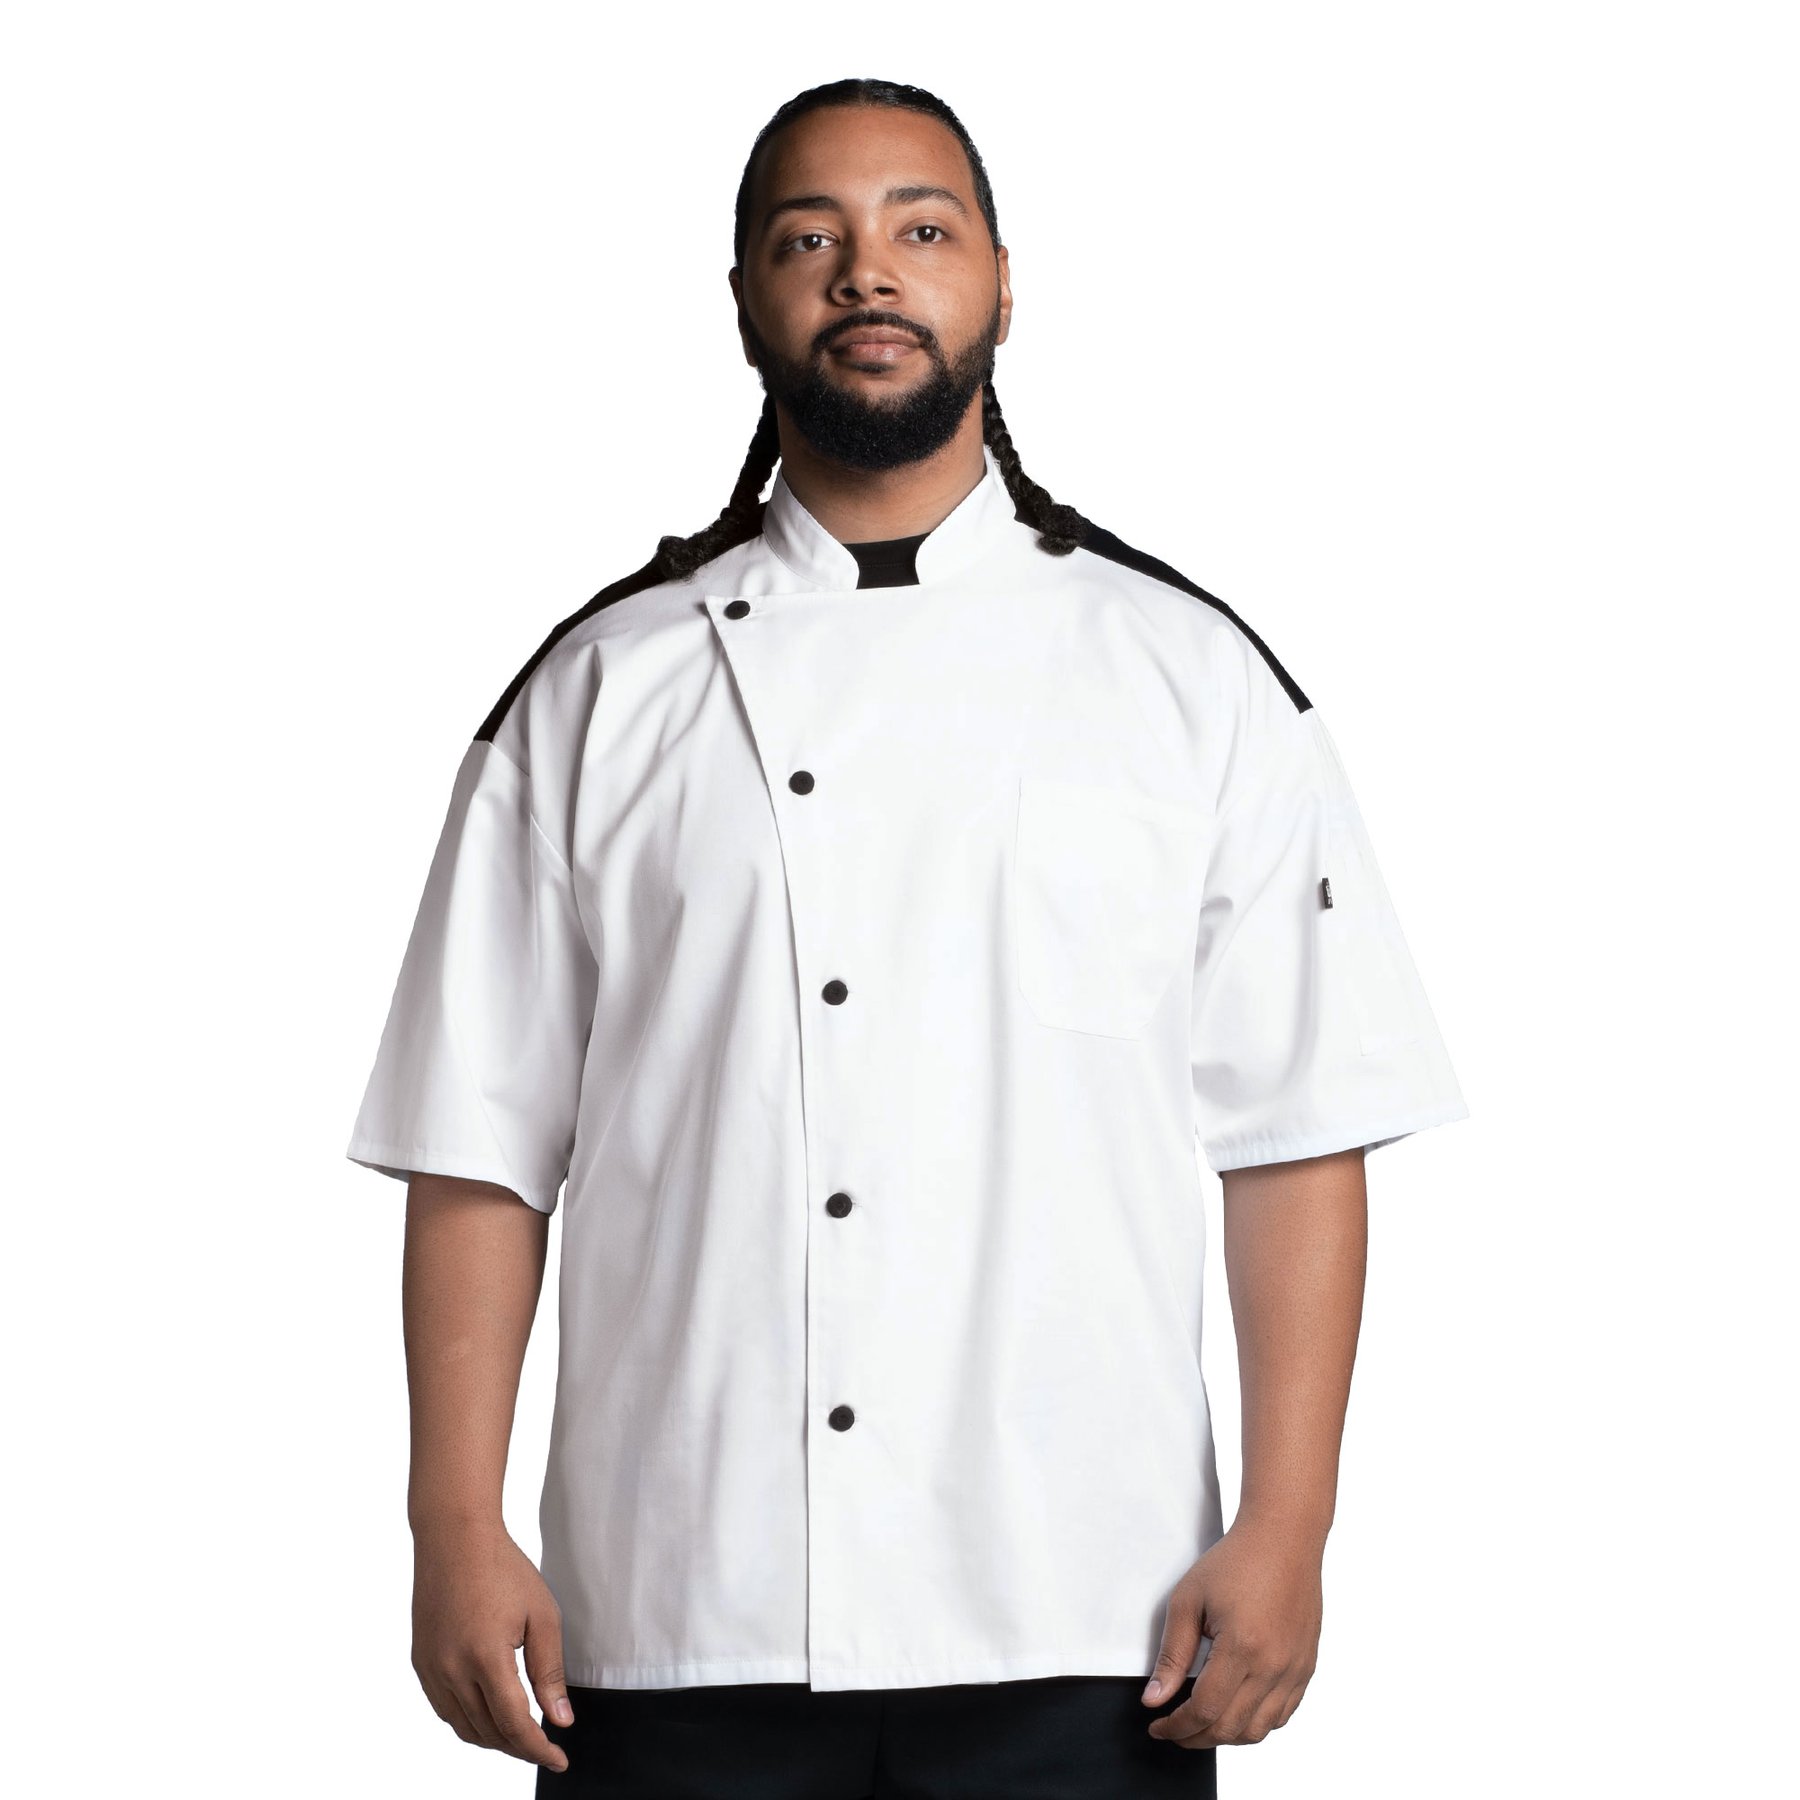 Rogue Chef Coat with Mesh 0701